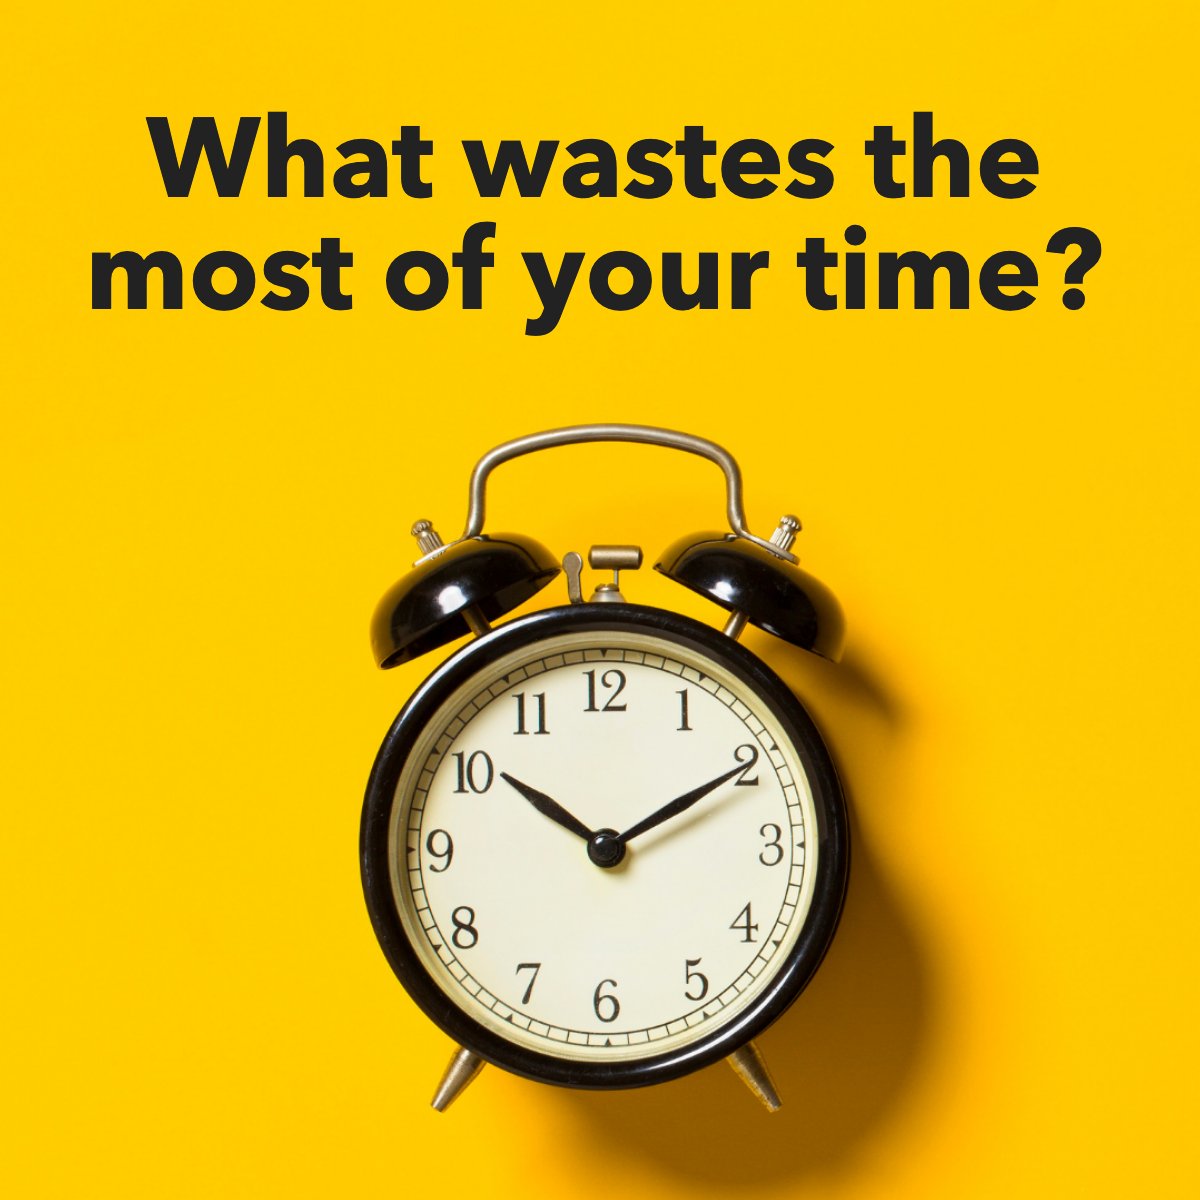 Nowadays, time is gold! ✨

What wastes your time the most? 🧭

#clock    #timemanagement    #timesup    #timeshare    #timekeeper    #allthetime
#premierrealestatenetwork #pren #realestate #realtor #barrettrealestate #bre #prescottquadcity #sedonaverdevalley